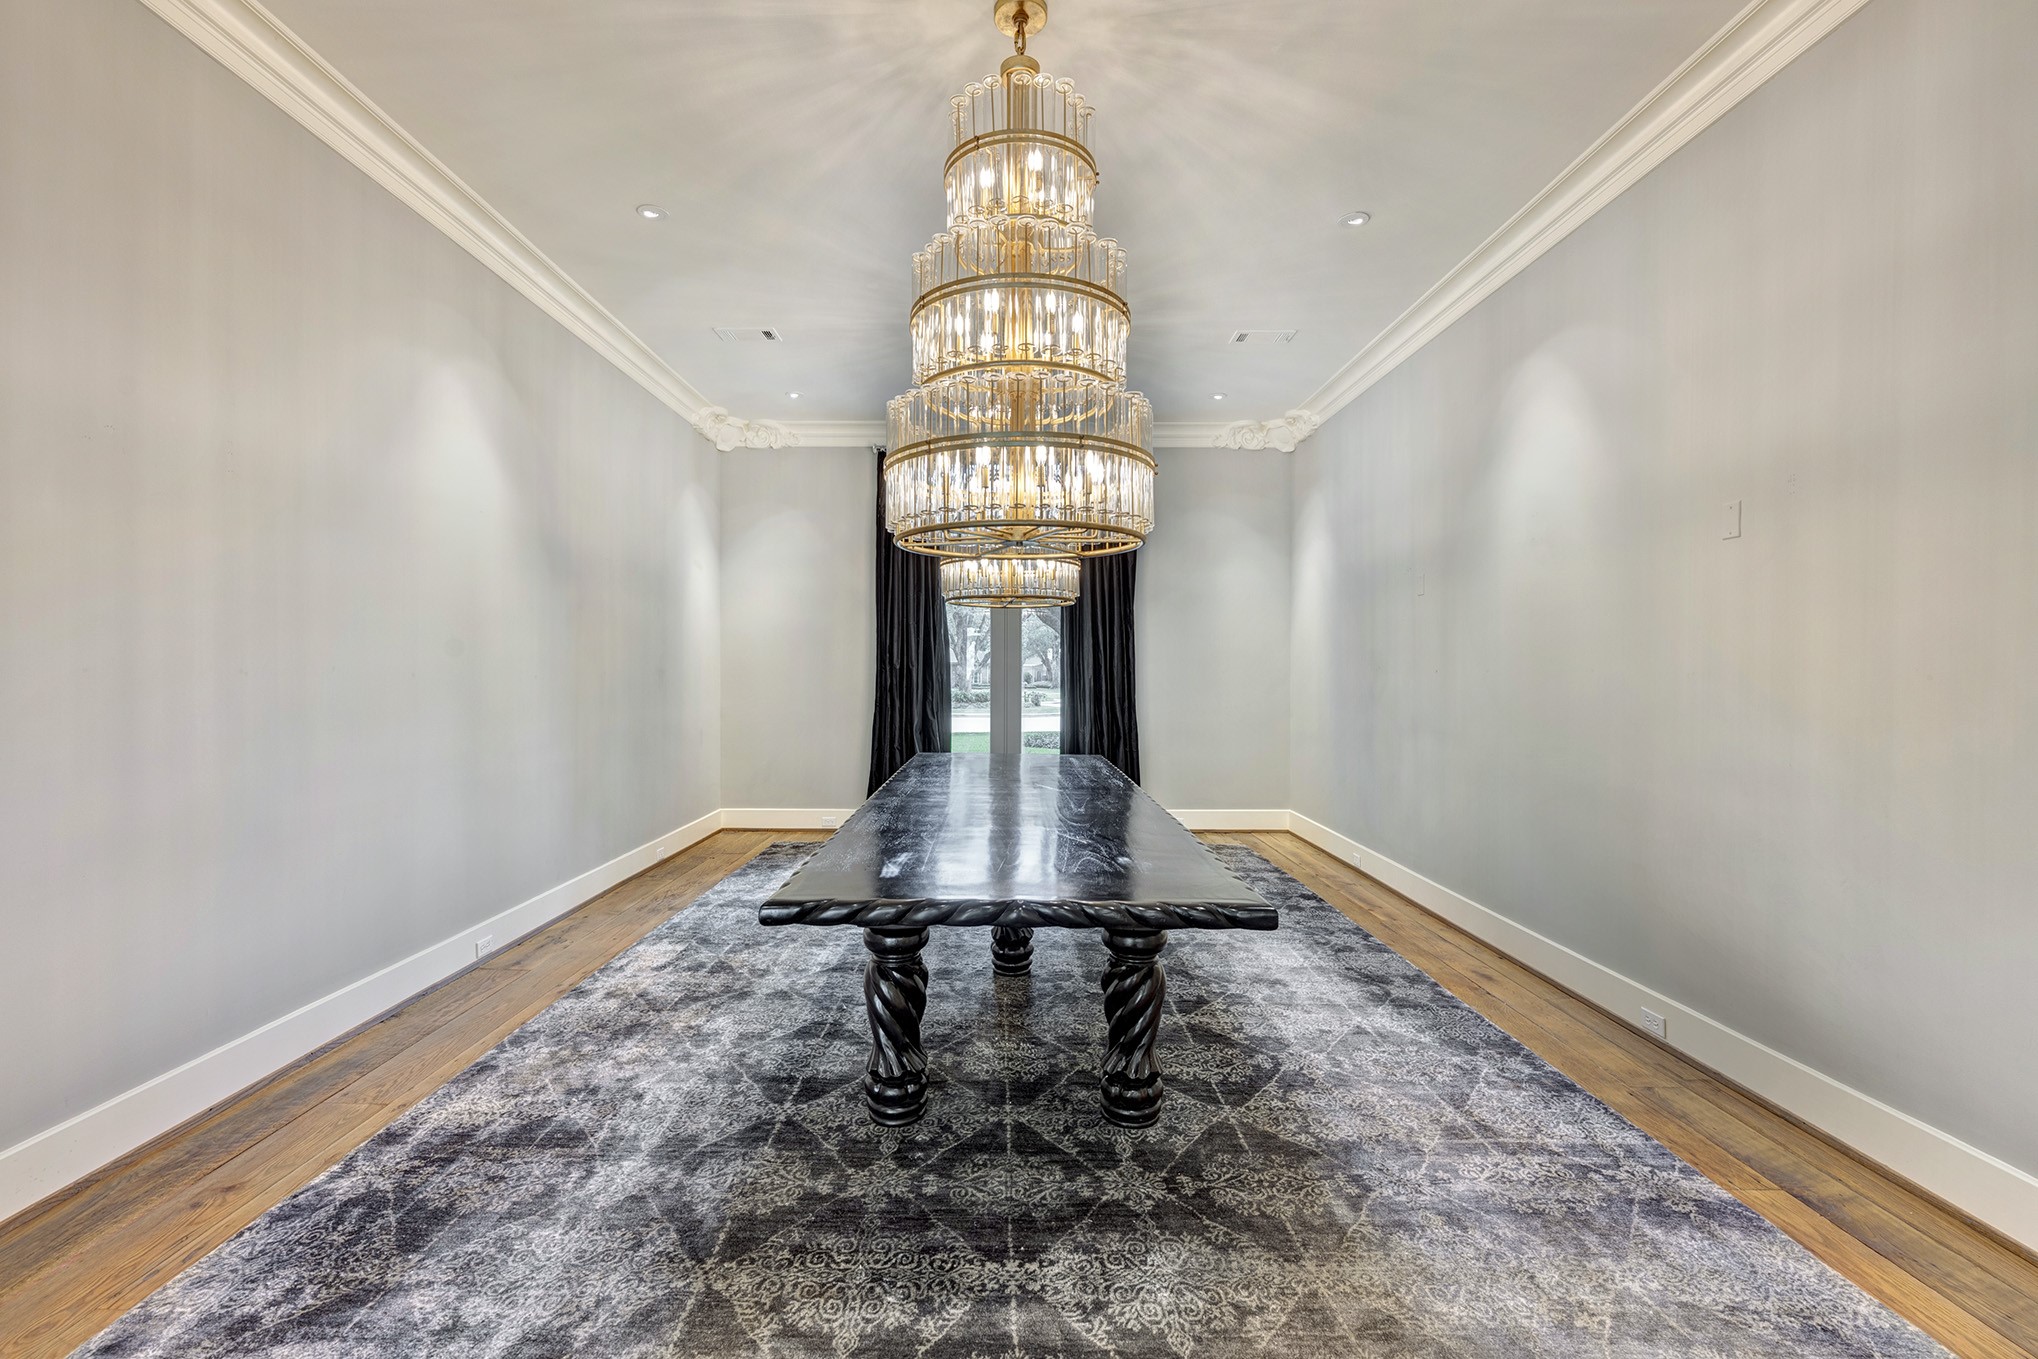 Spacious formal dining room with hallway to butler's pantry and kitchen, and arched opening to wet bar. Tall ceilings allow for large art installations and entertaining for large groups!